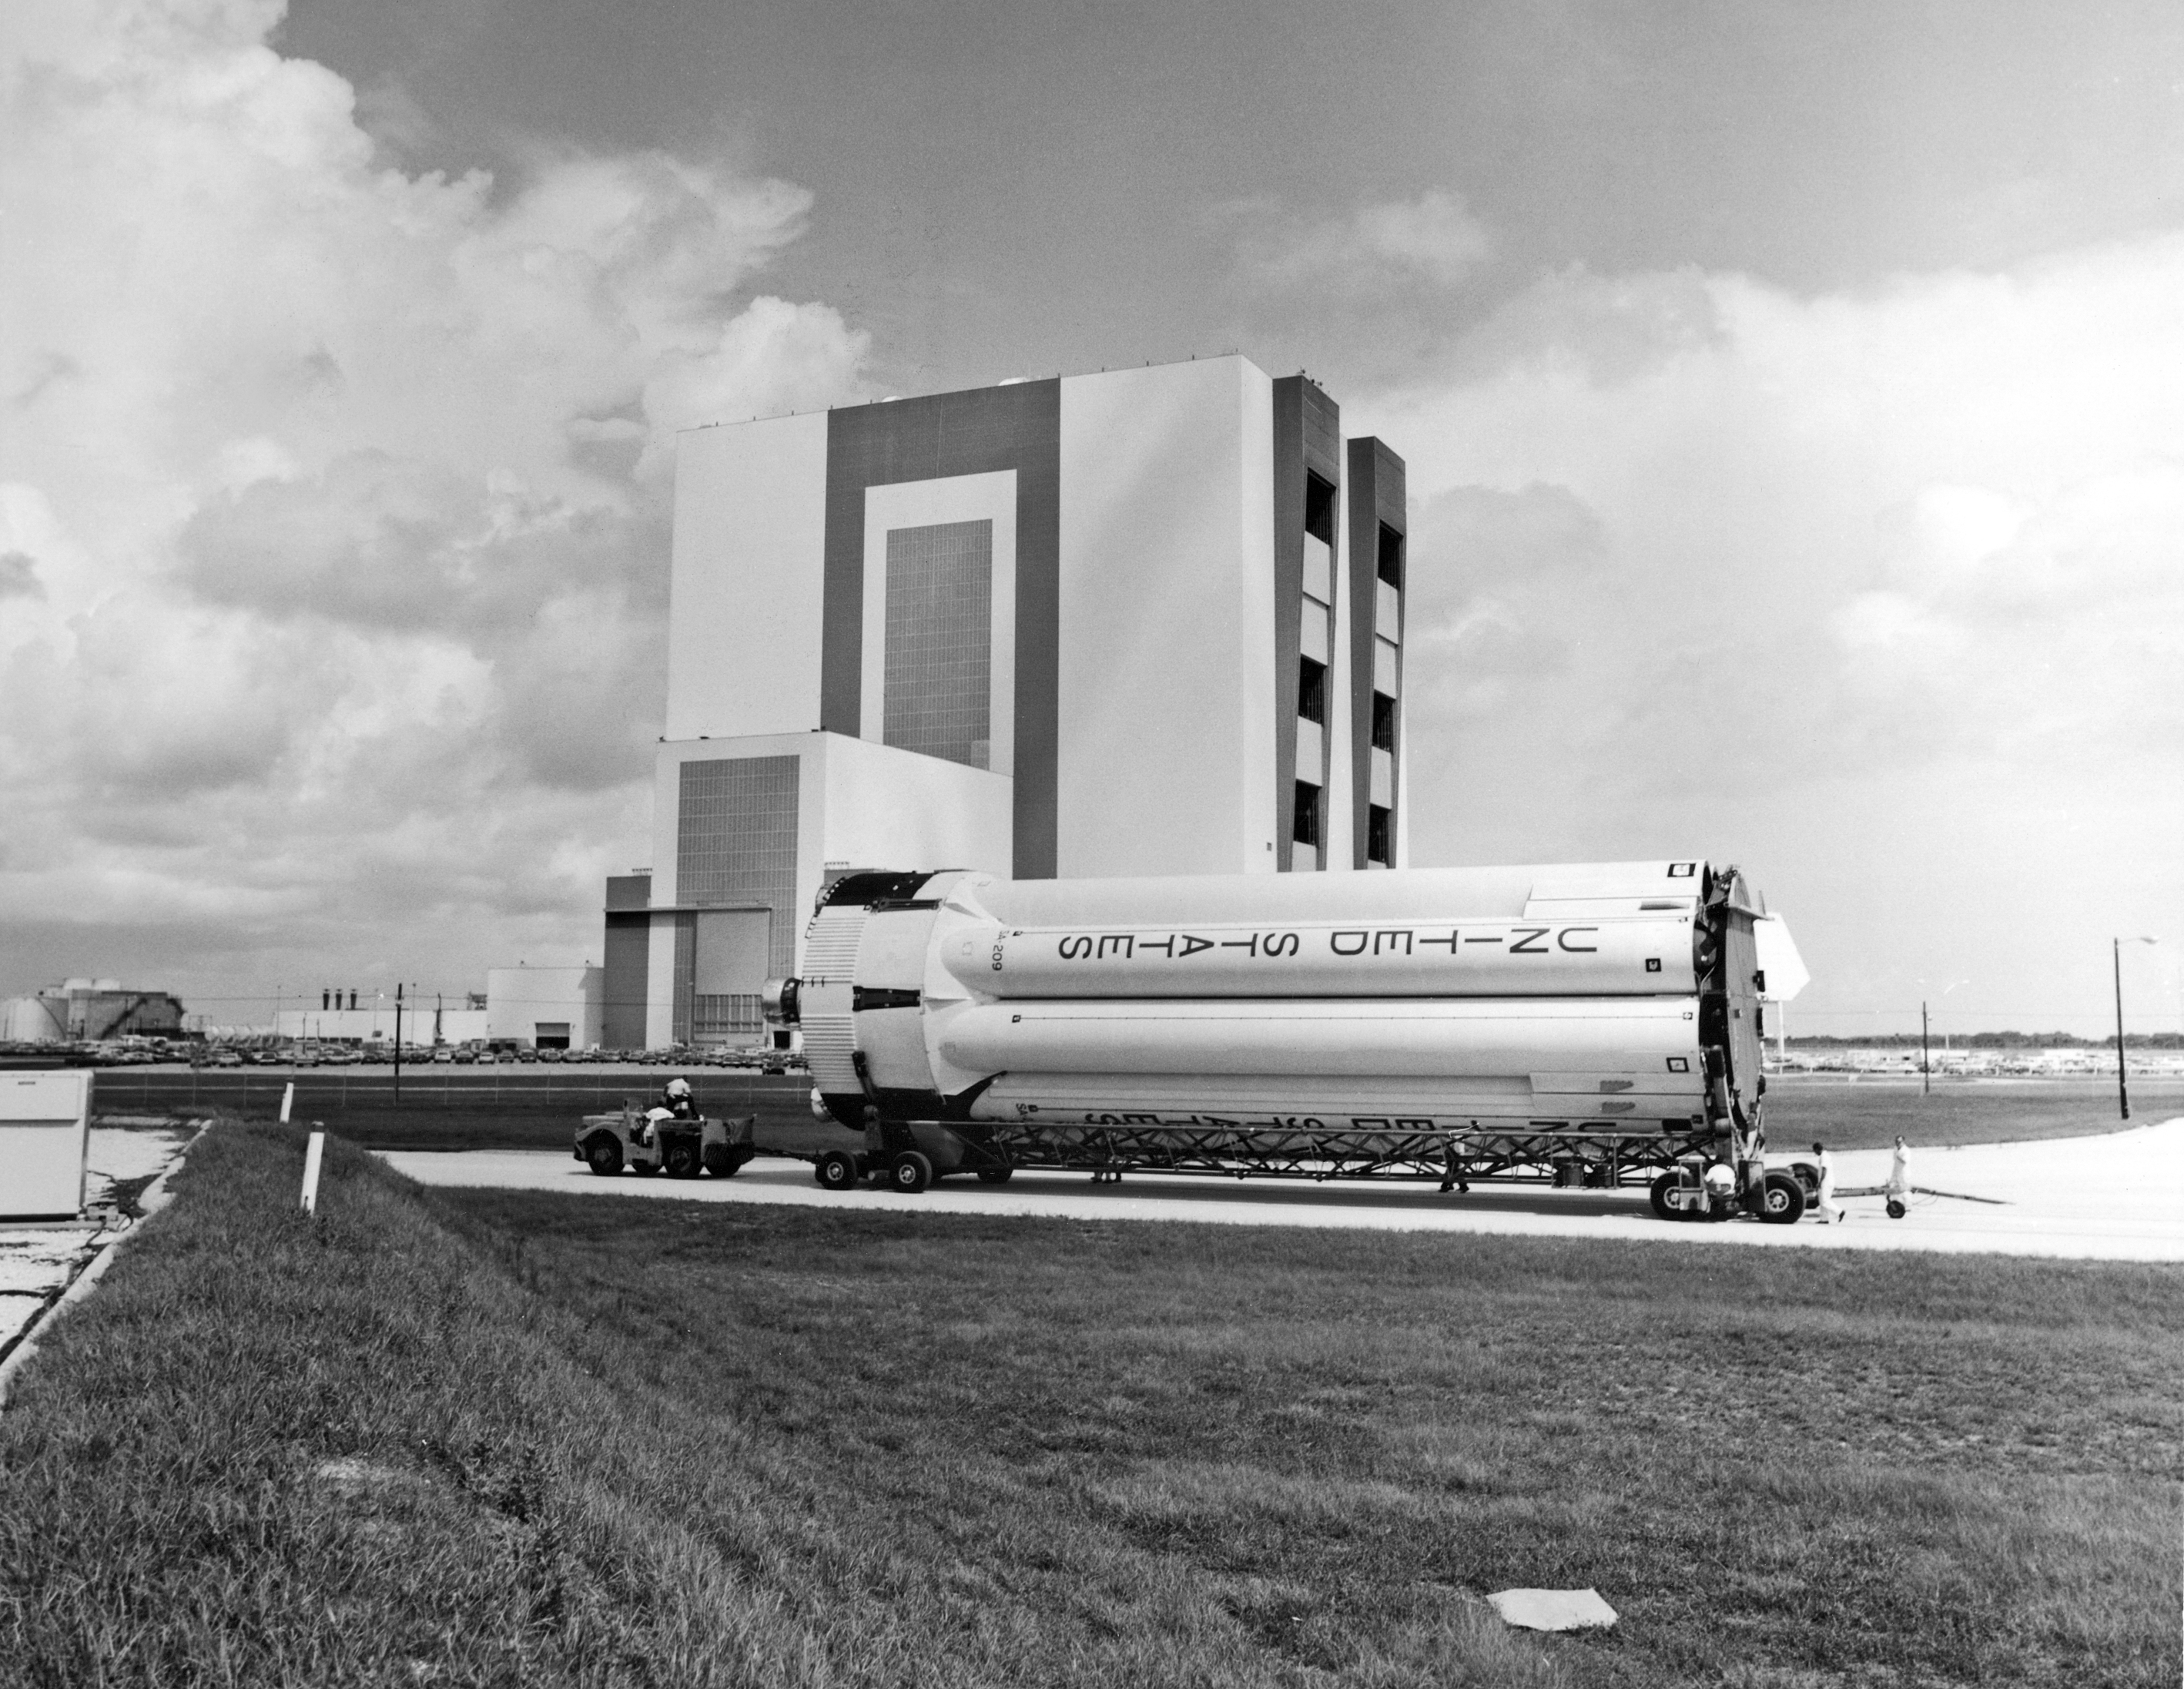 The S-IB first stage for Saturn-IB SA-209, the Skylab 4 rescue mission, arrives at the Vehicle Assembly Building (VAB) at NASA’s Kennedy Space Center